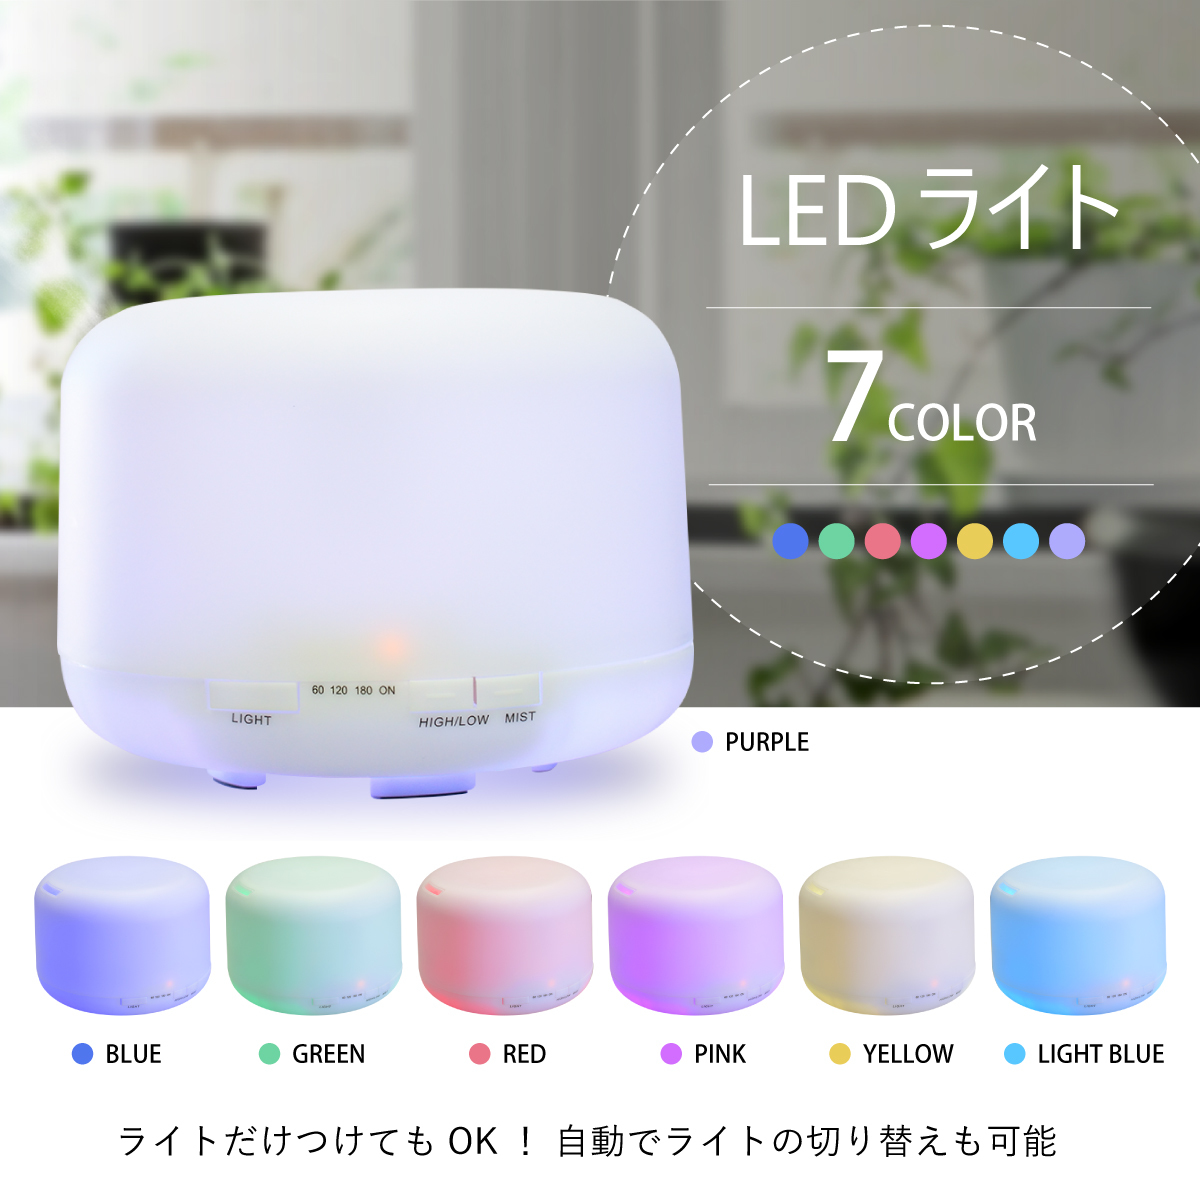  humidifier ultrasound aroma diffuser aroma Ultrasonic System 500ml high capacity LED light 7 color timer stylish empty roasting prevention quiet sound dry measures remote control attaching 